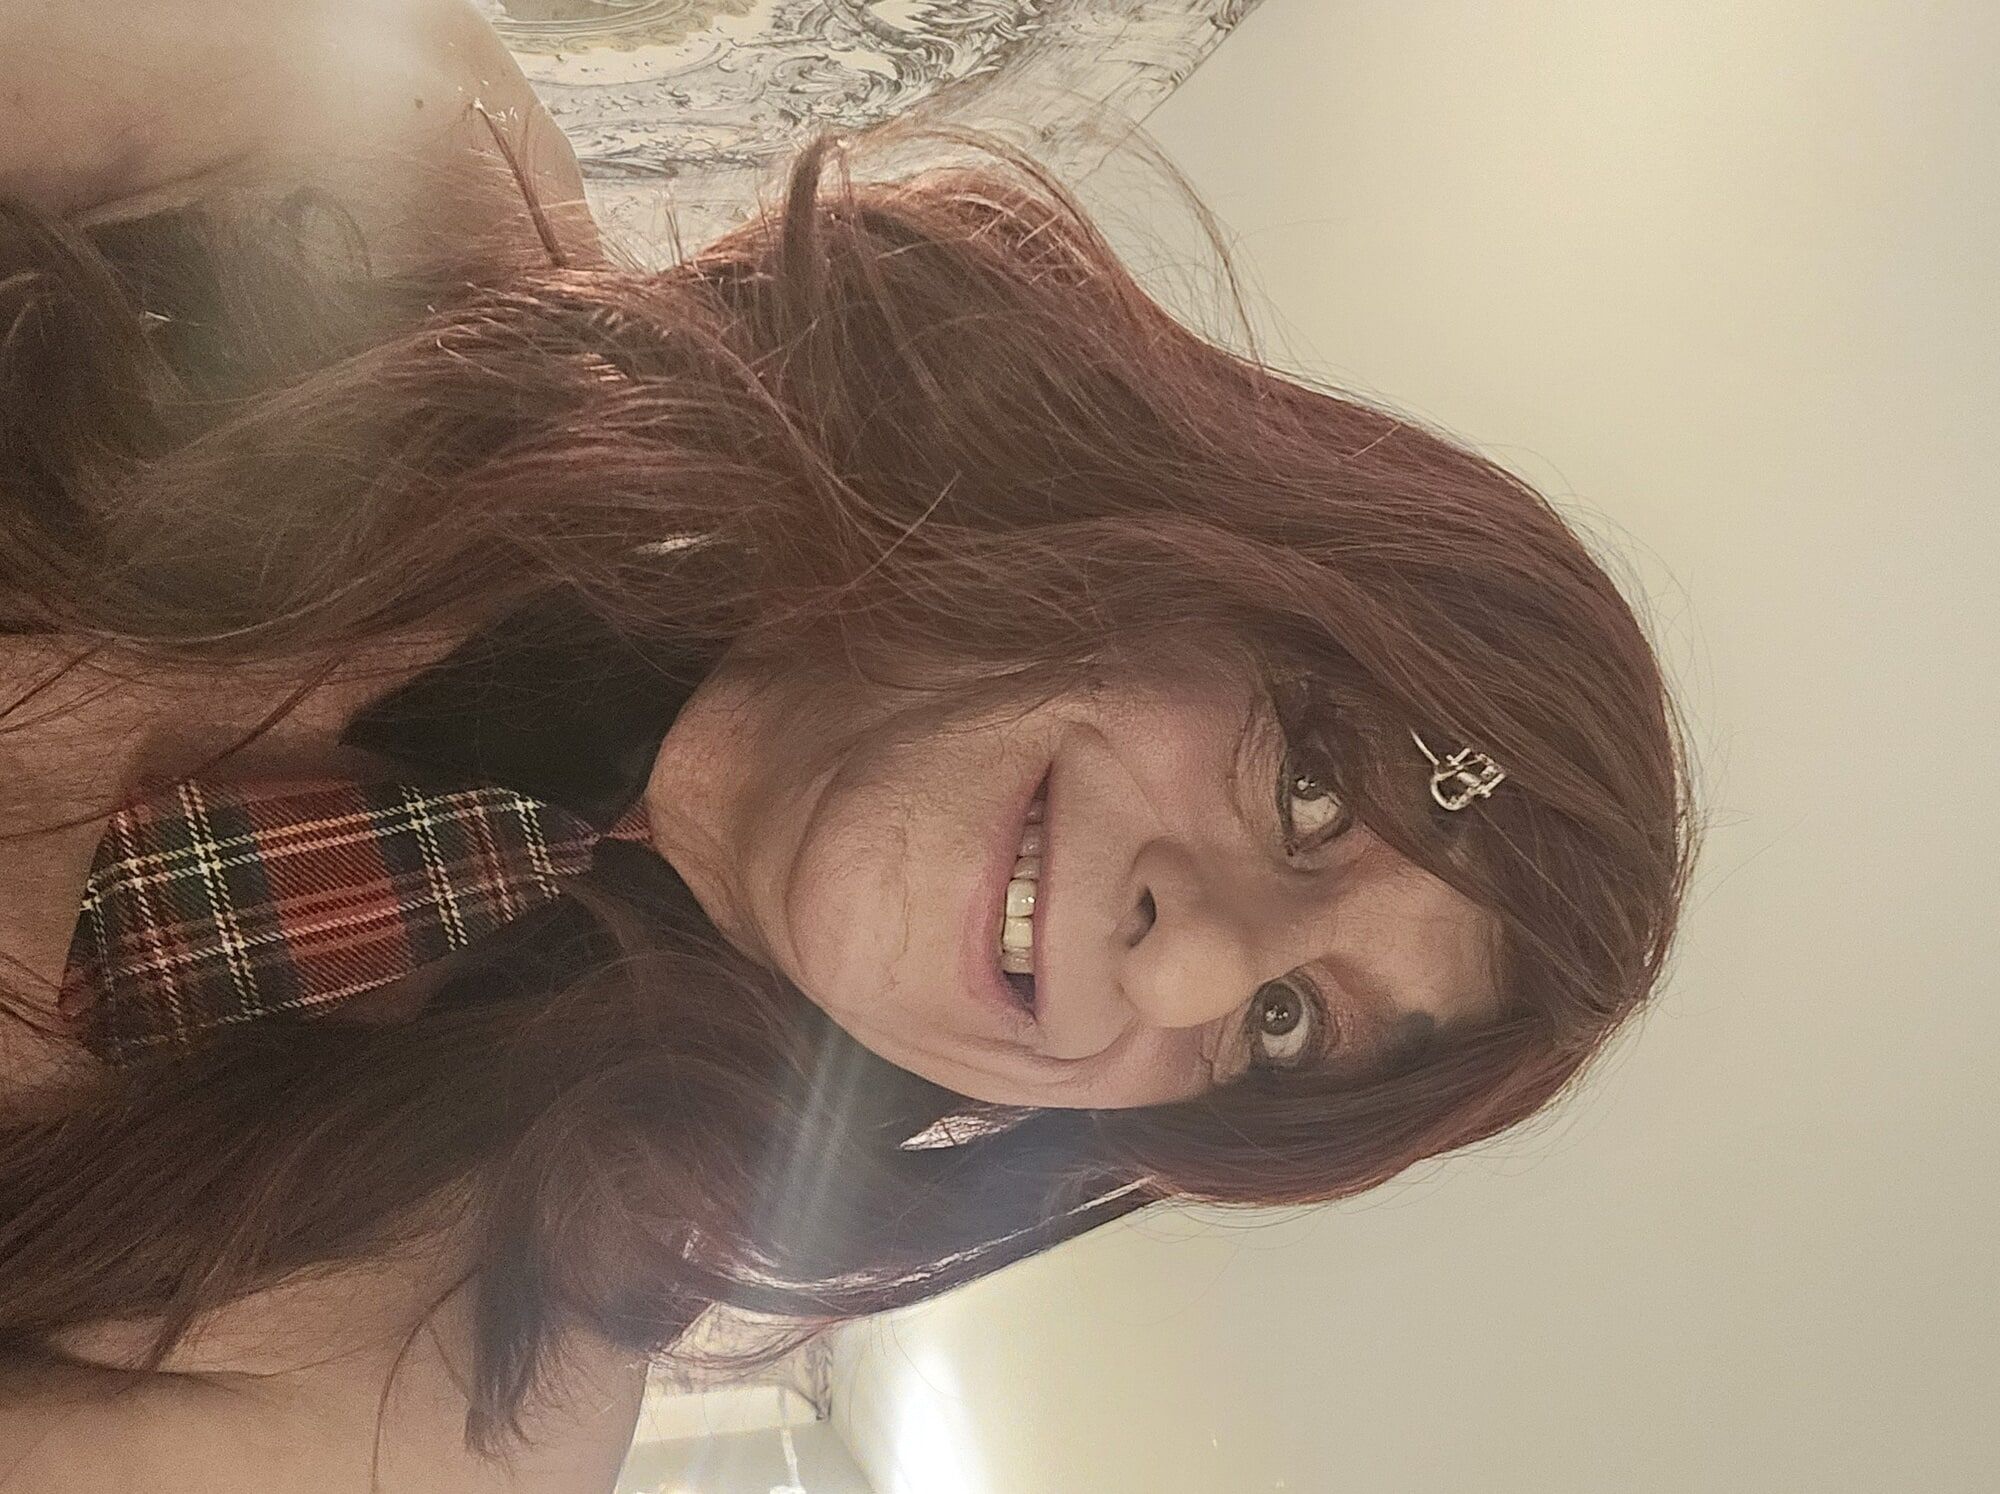 Being all pretty sissy crossdresser with a new look #13